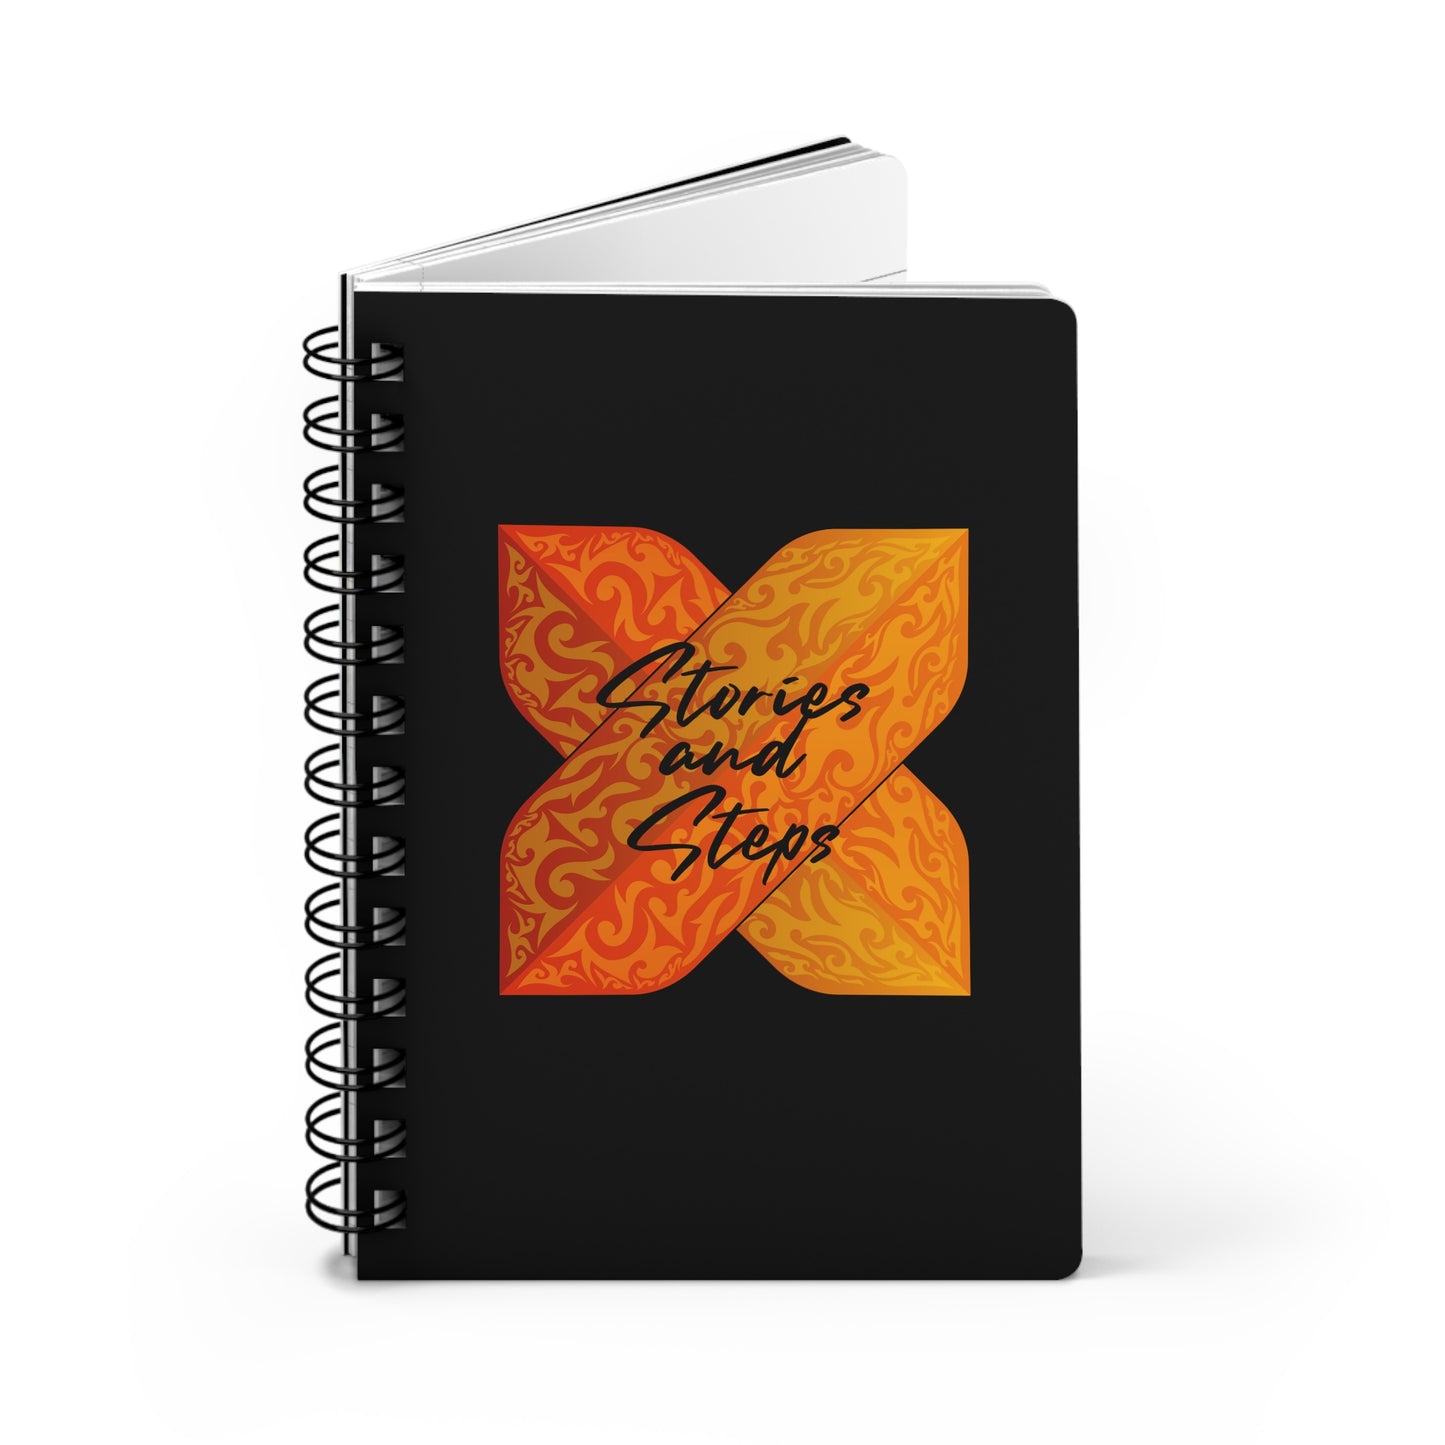 "My Stories and Steps" 5 x 7 Recovery Journal